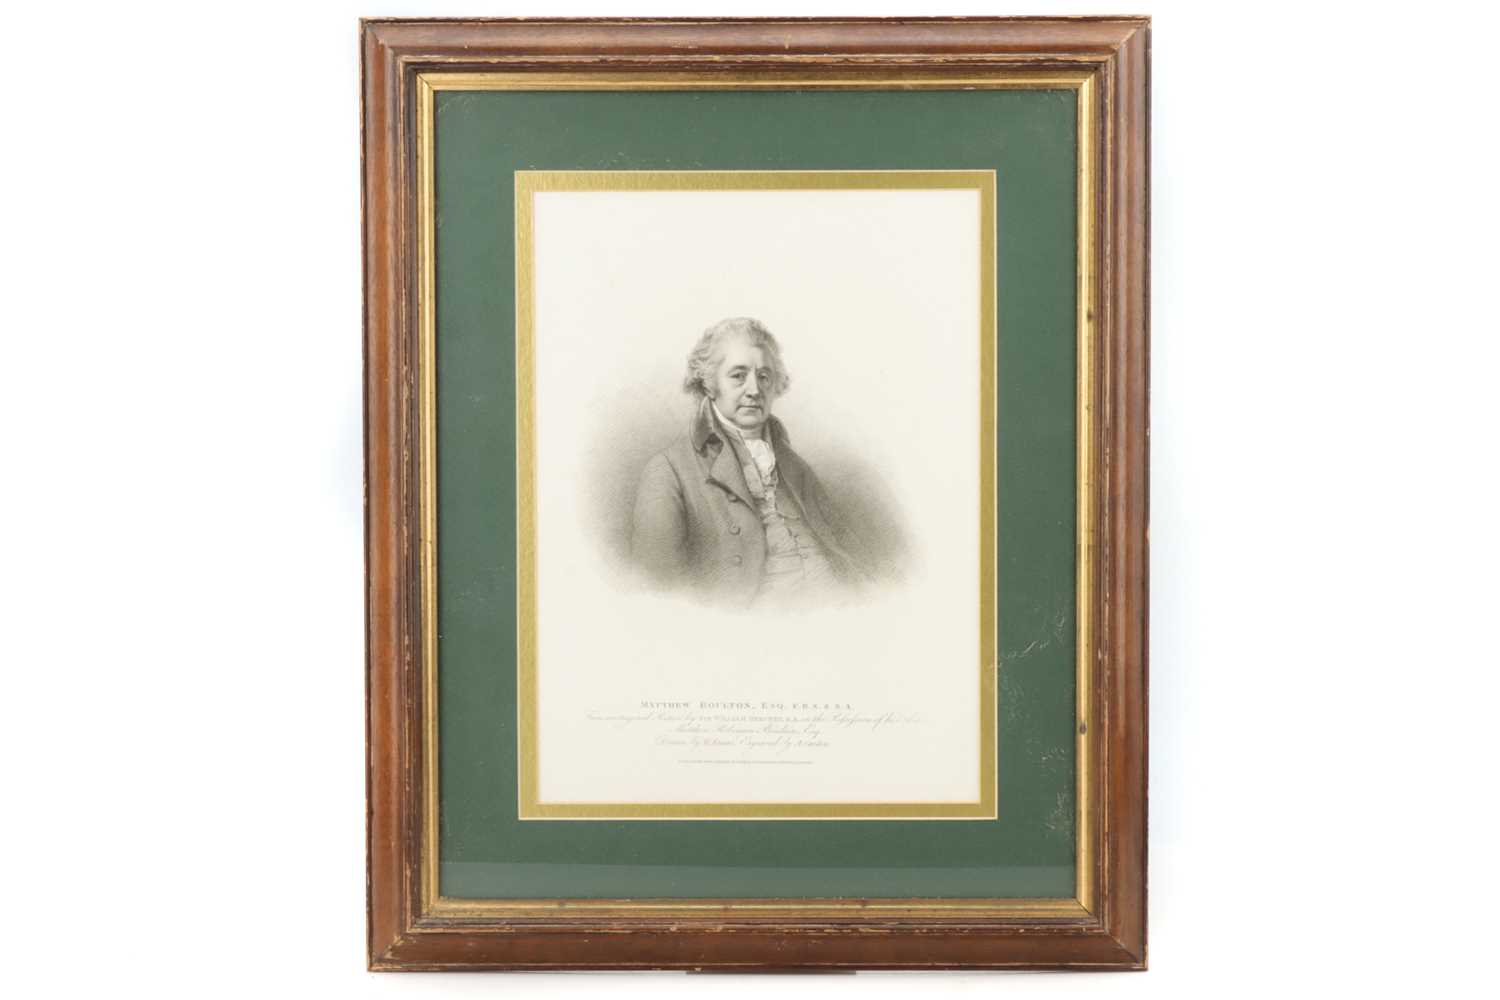 Lot 90 - A Fine Engraving of the Engineer Matthew Boulton